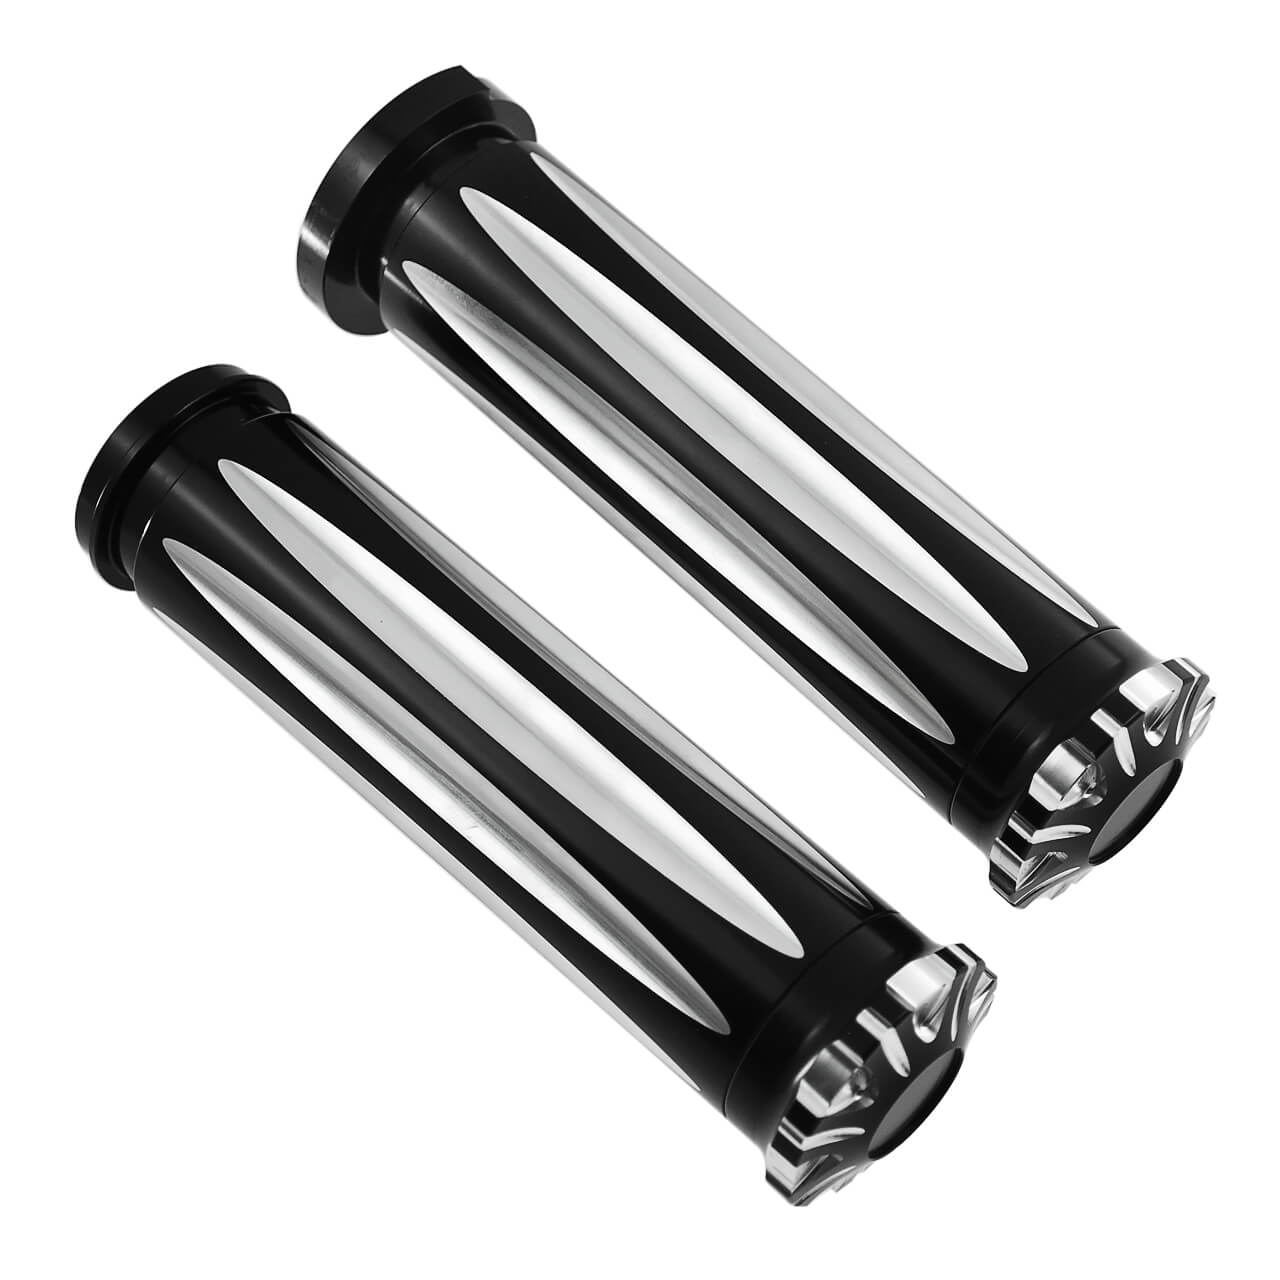 gp000202-hand-grips-for-harley